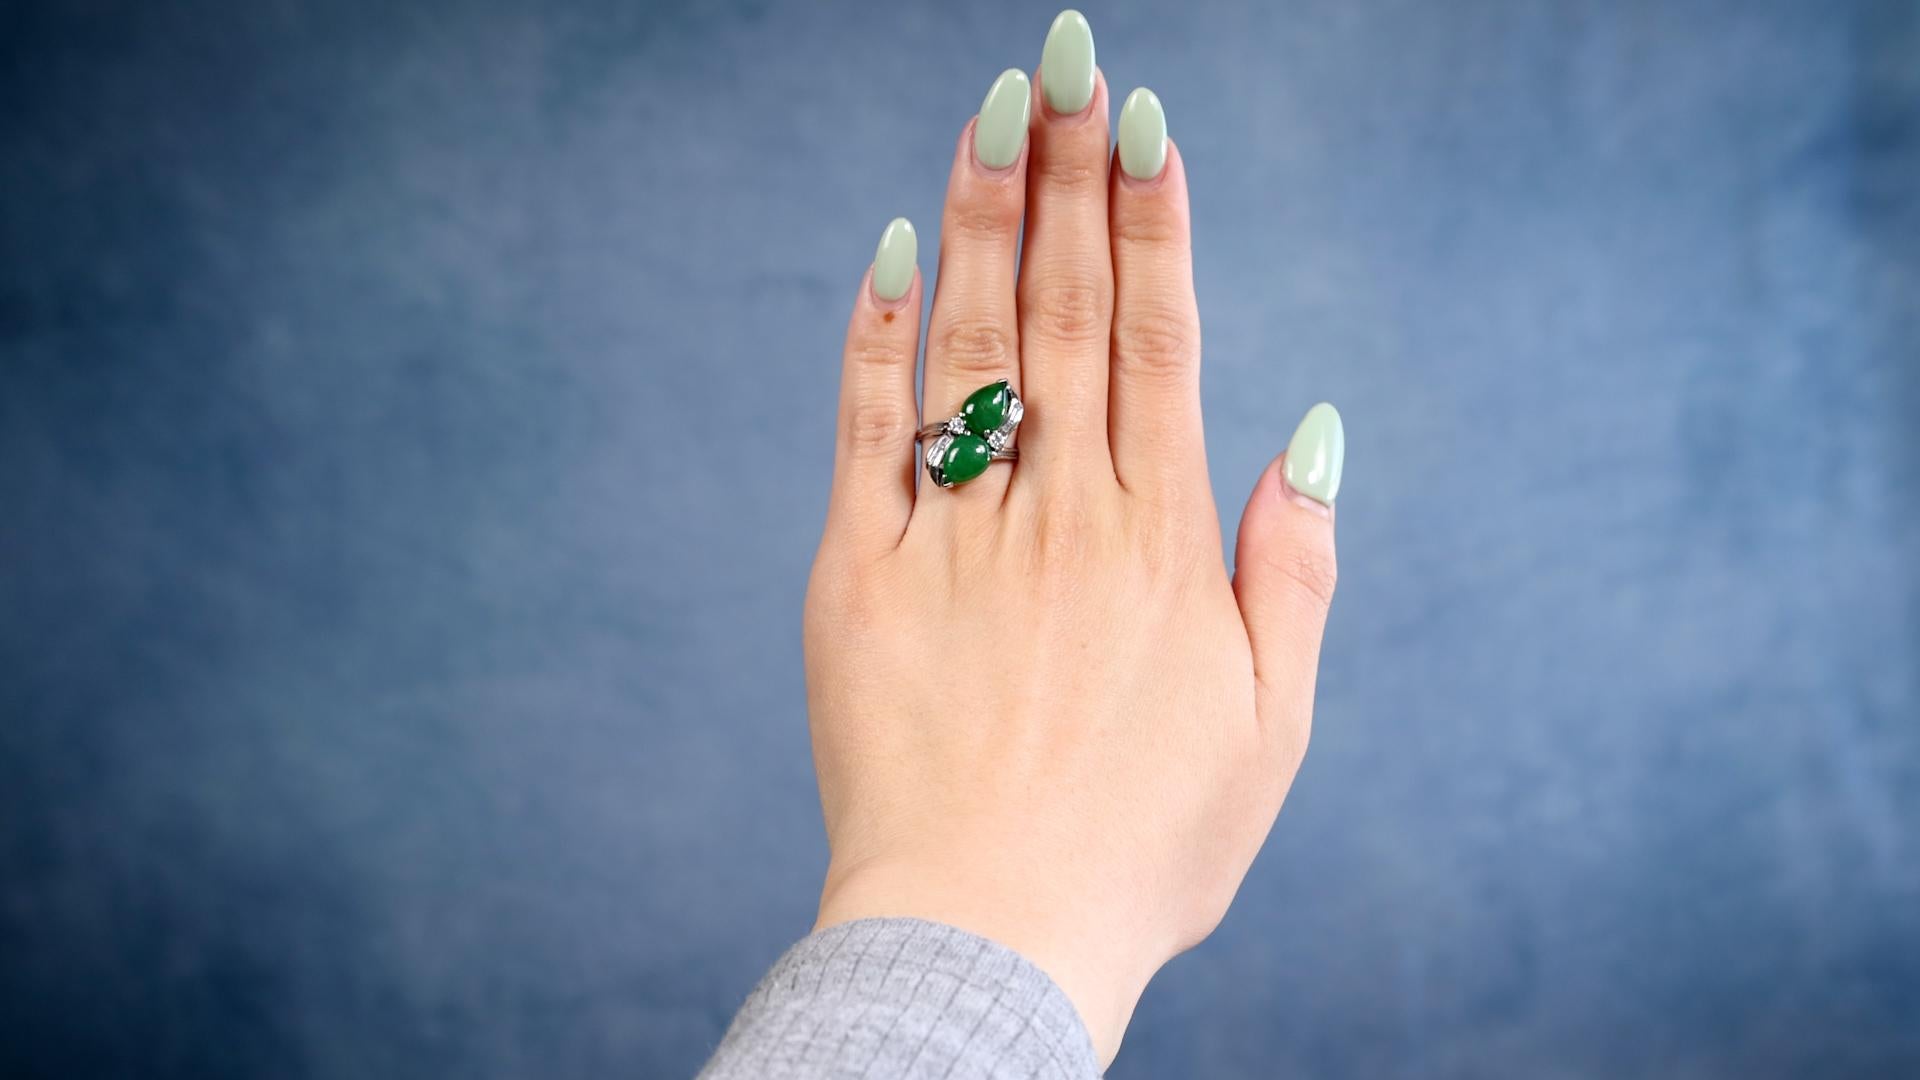 One Mid-Century Jadeite Diamond 14k White Gold Toi et Moi Ring. Featuring two pear cut jadeite cabochons with a total weight of approximately 4.20 carats. Accented by two round brilliant and four baguette cut diamonds with a total weight of